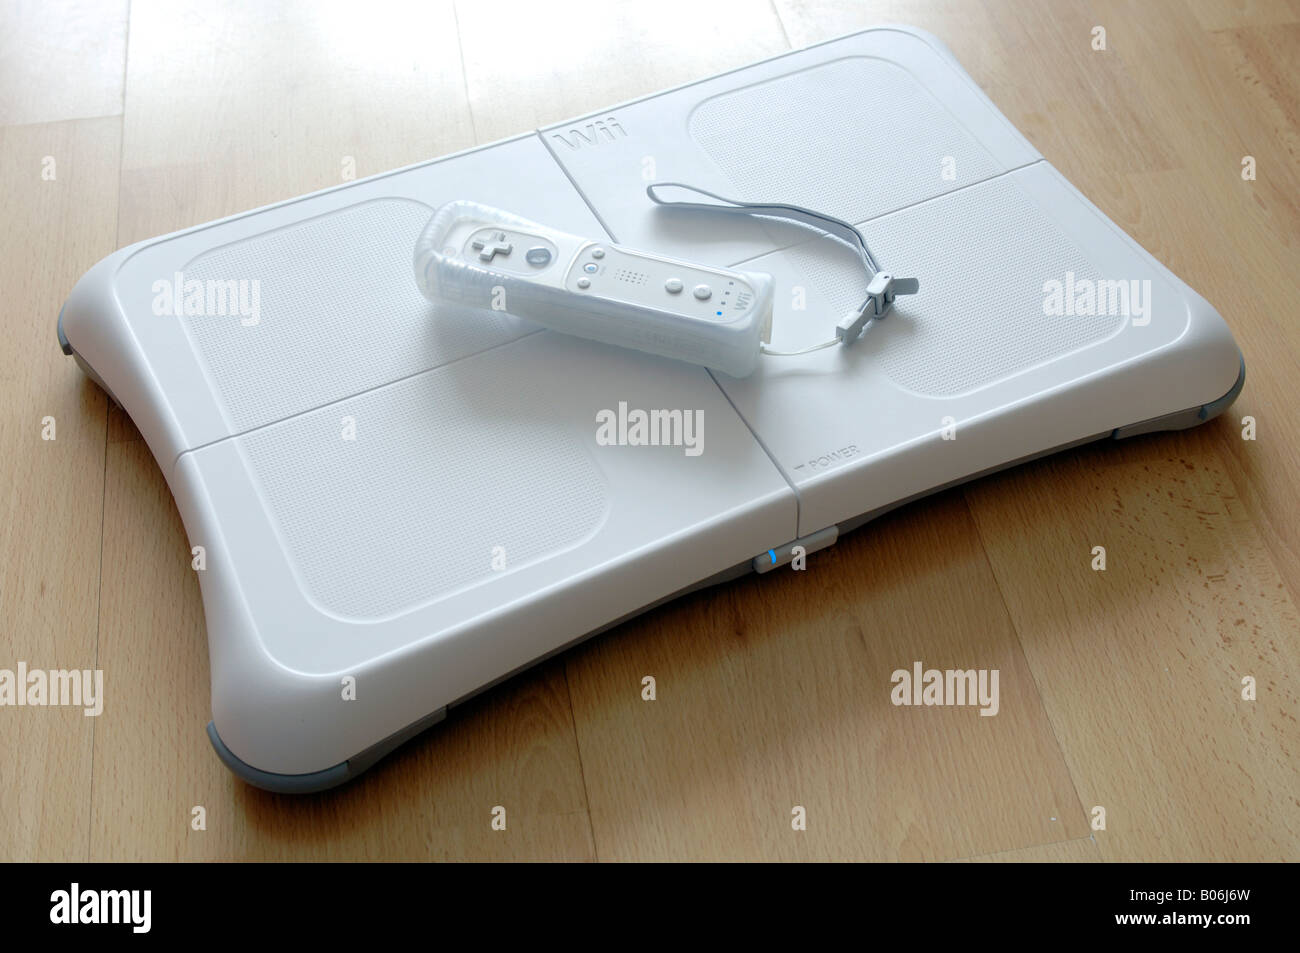 Wii Fit Balance Board High Resolution Stock Photography And Images Alamy